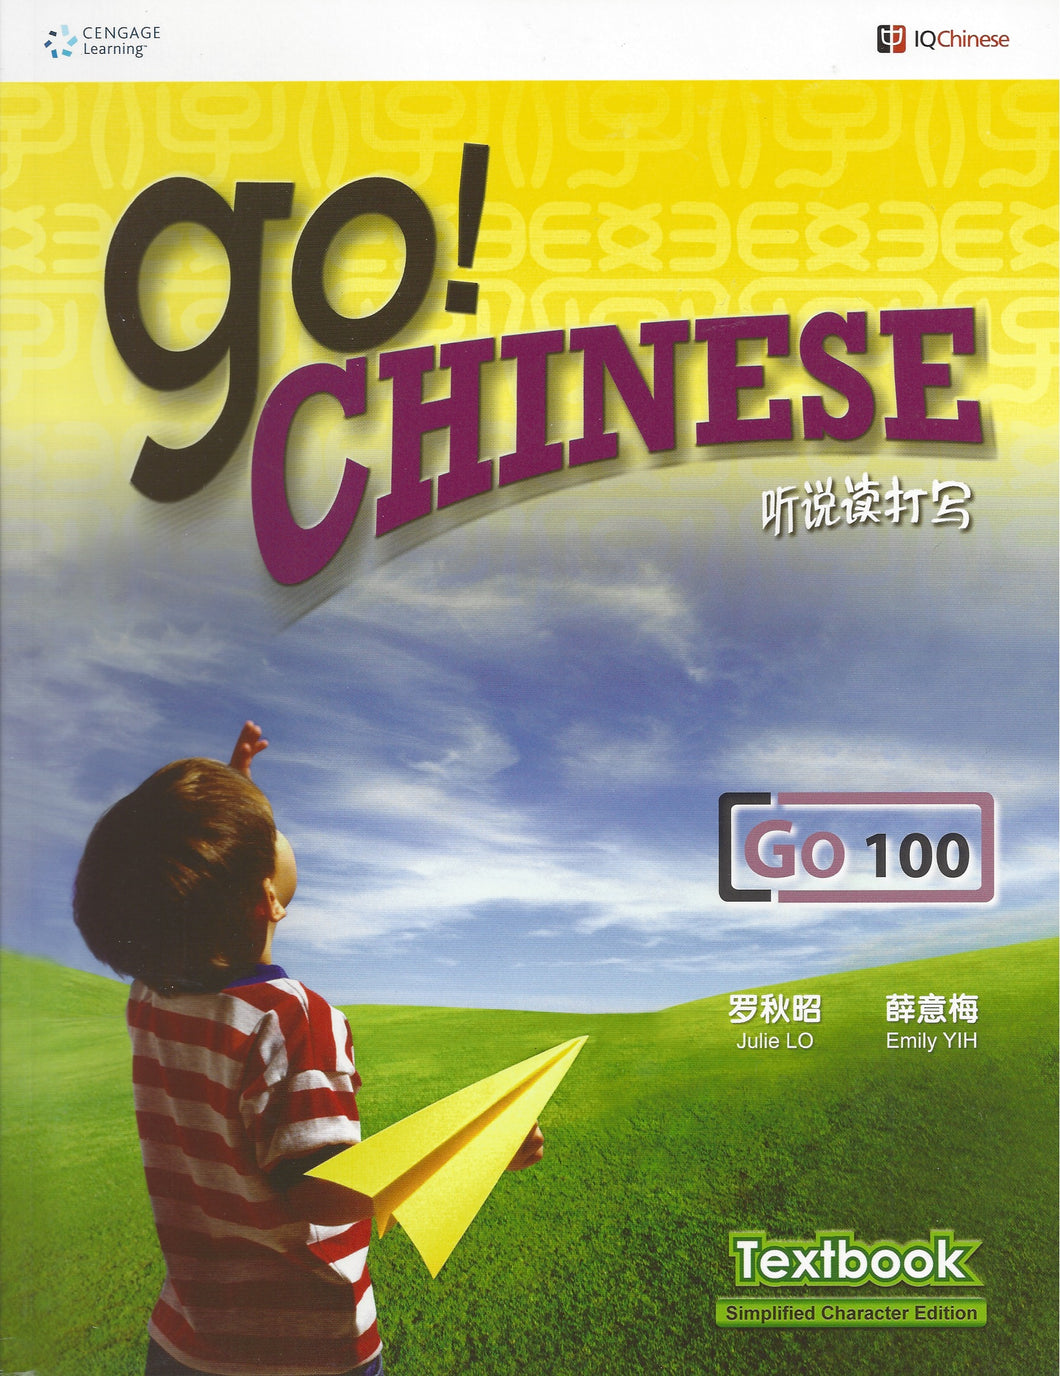 Go Chinese and IQ Chinese 100-Textbook-Simplified